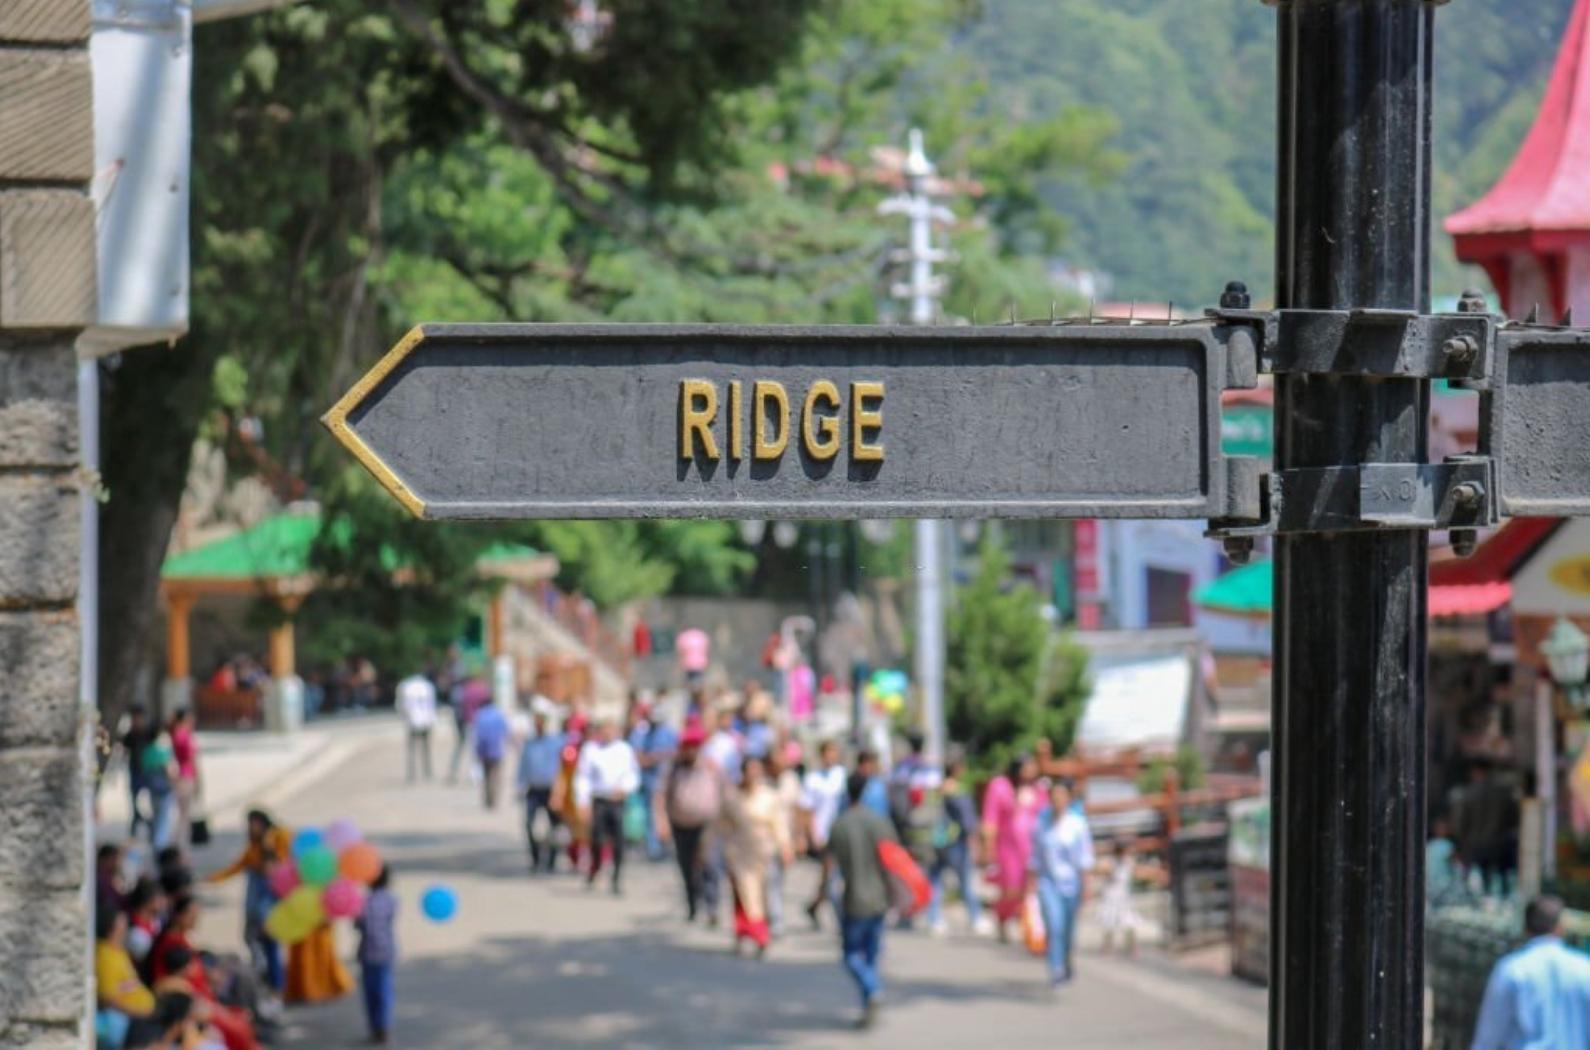 The Ridge road sign_street name. The Ridge road is a large open space, located in the center of Shimla.